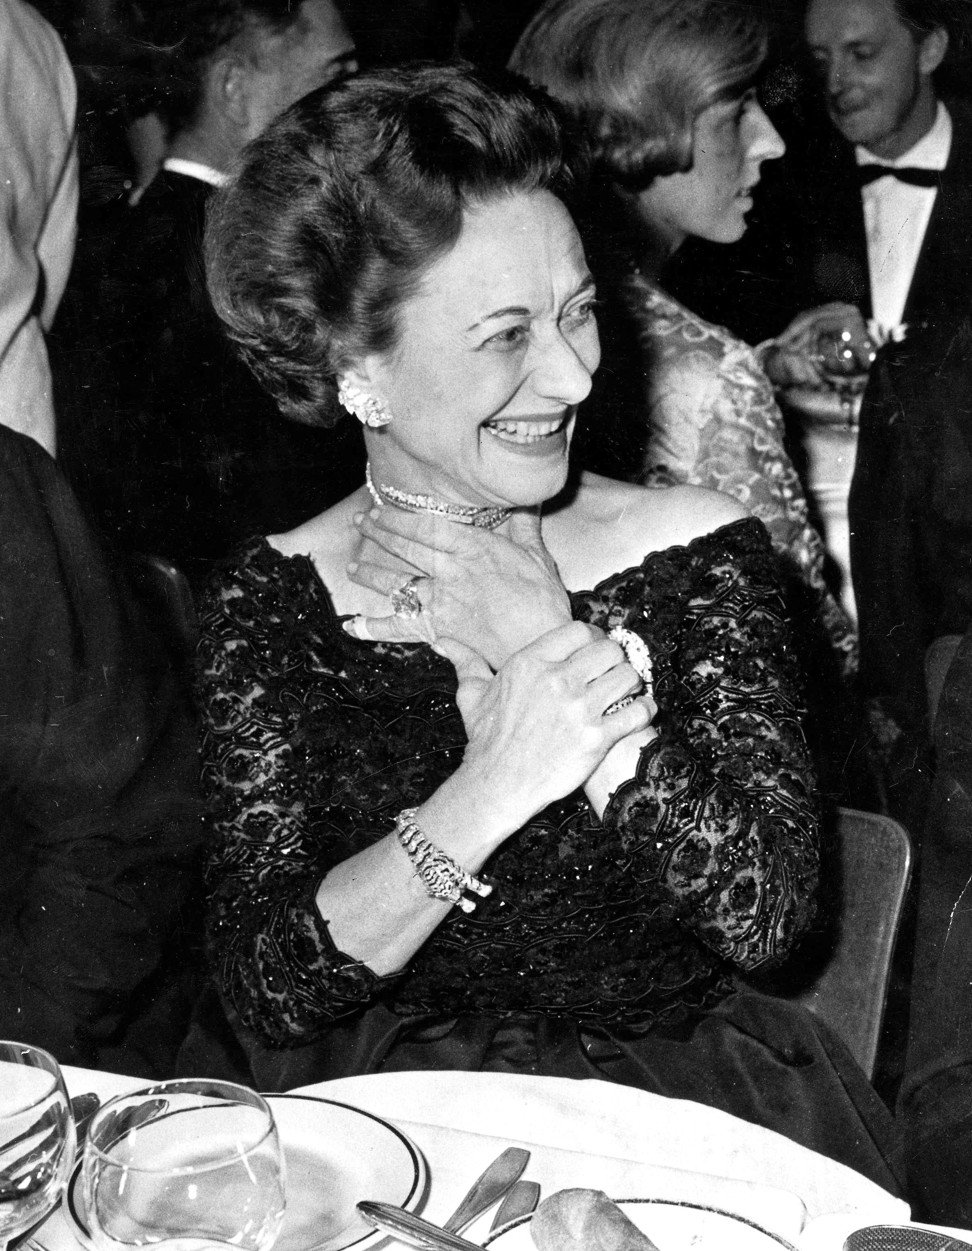 The Duchess of Windsor (formerly Miss Wallis Simpson) in 1959.